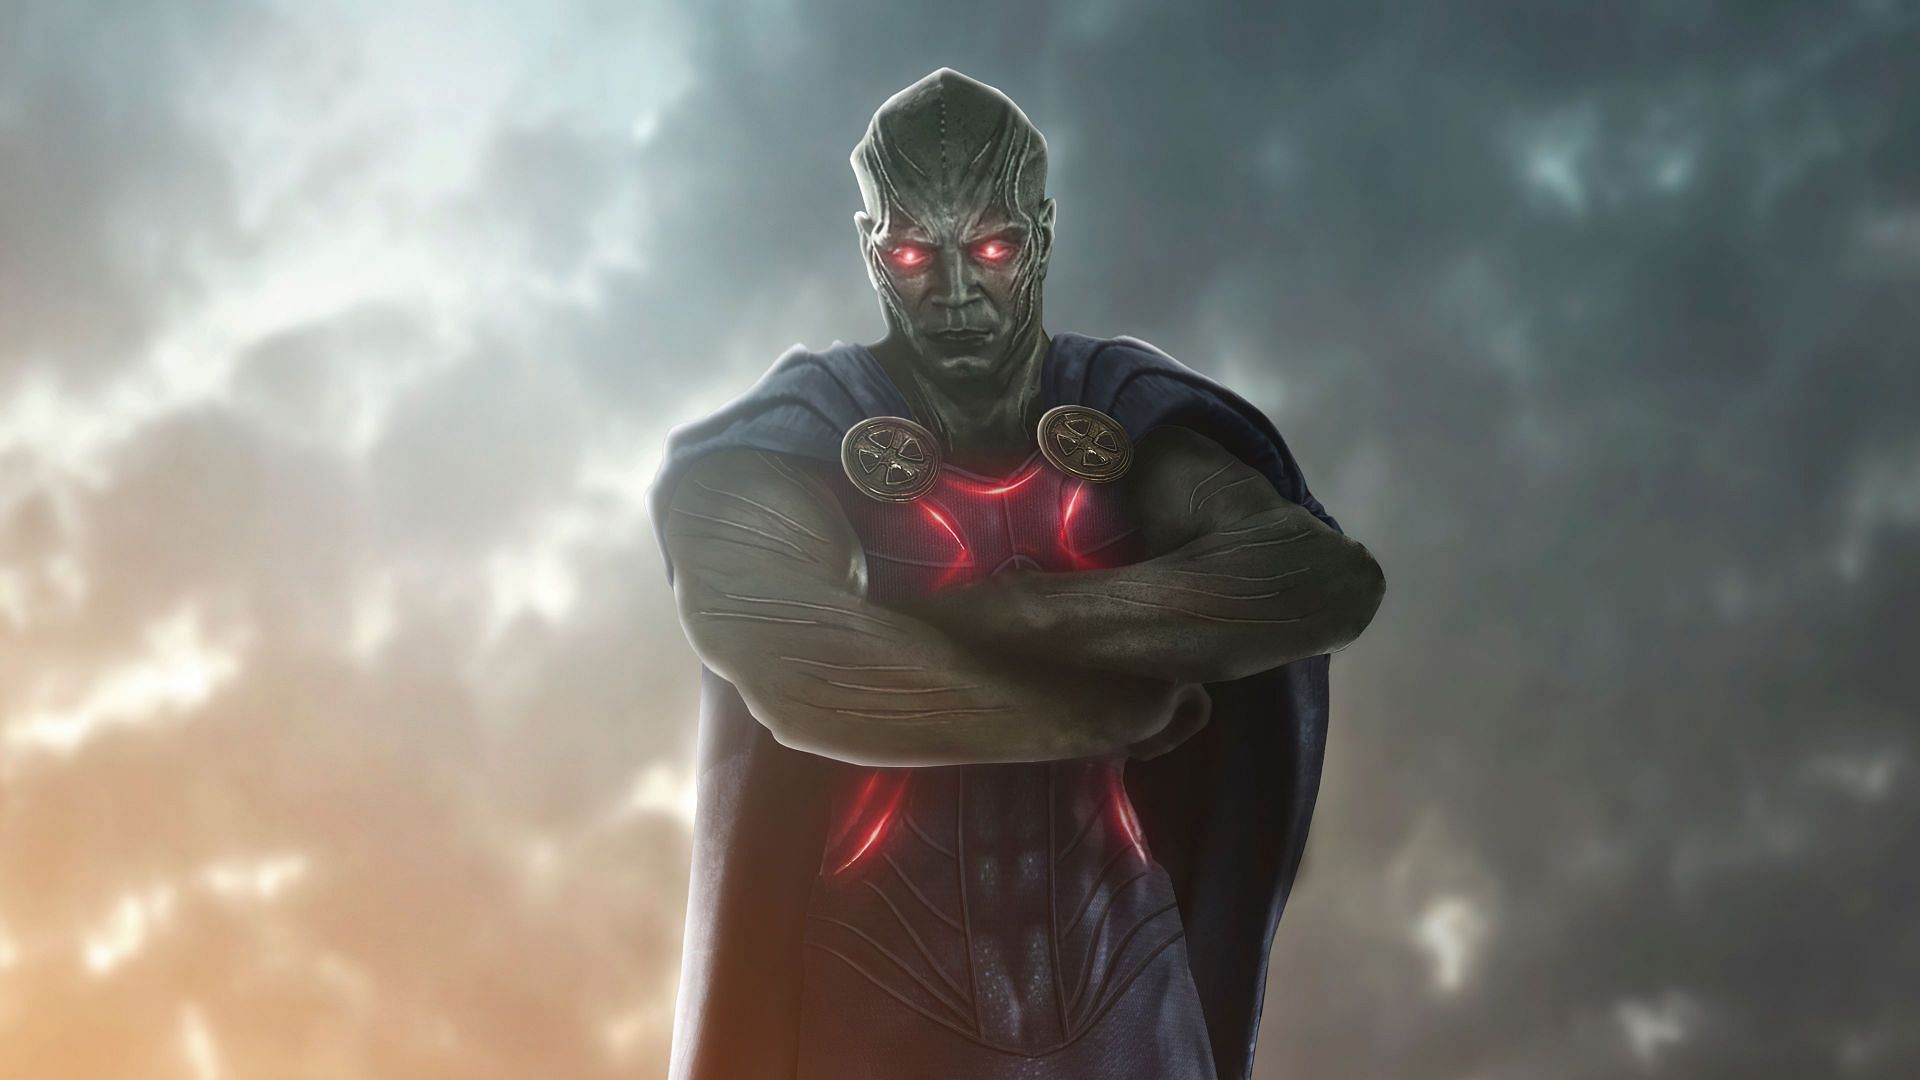 Martian Manhunter is more than qualified to take down the Mad Titan. (Image via DC)